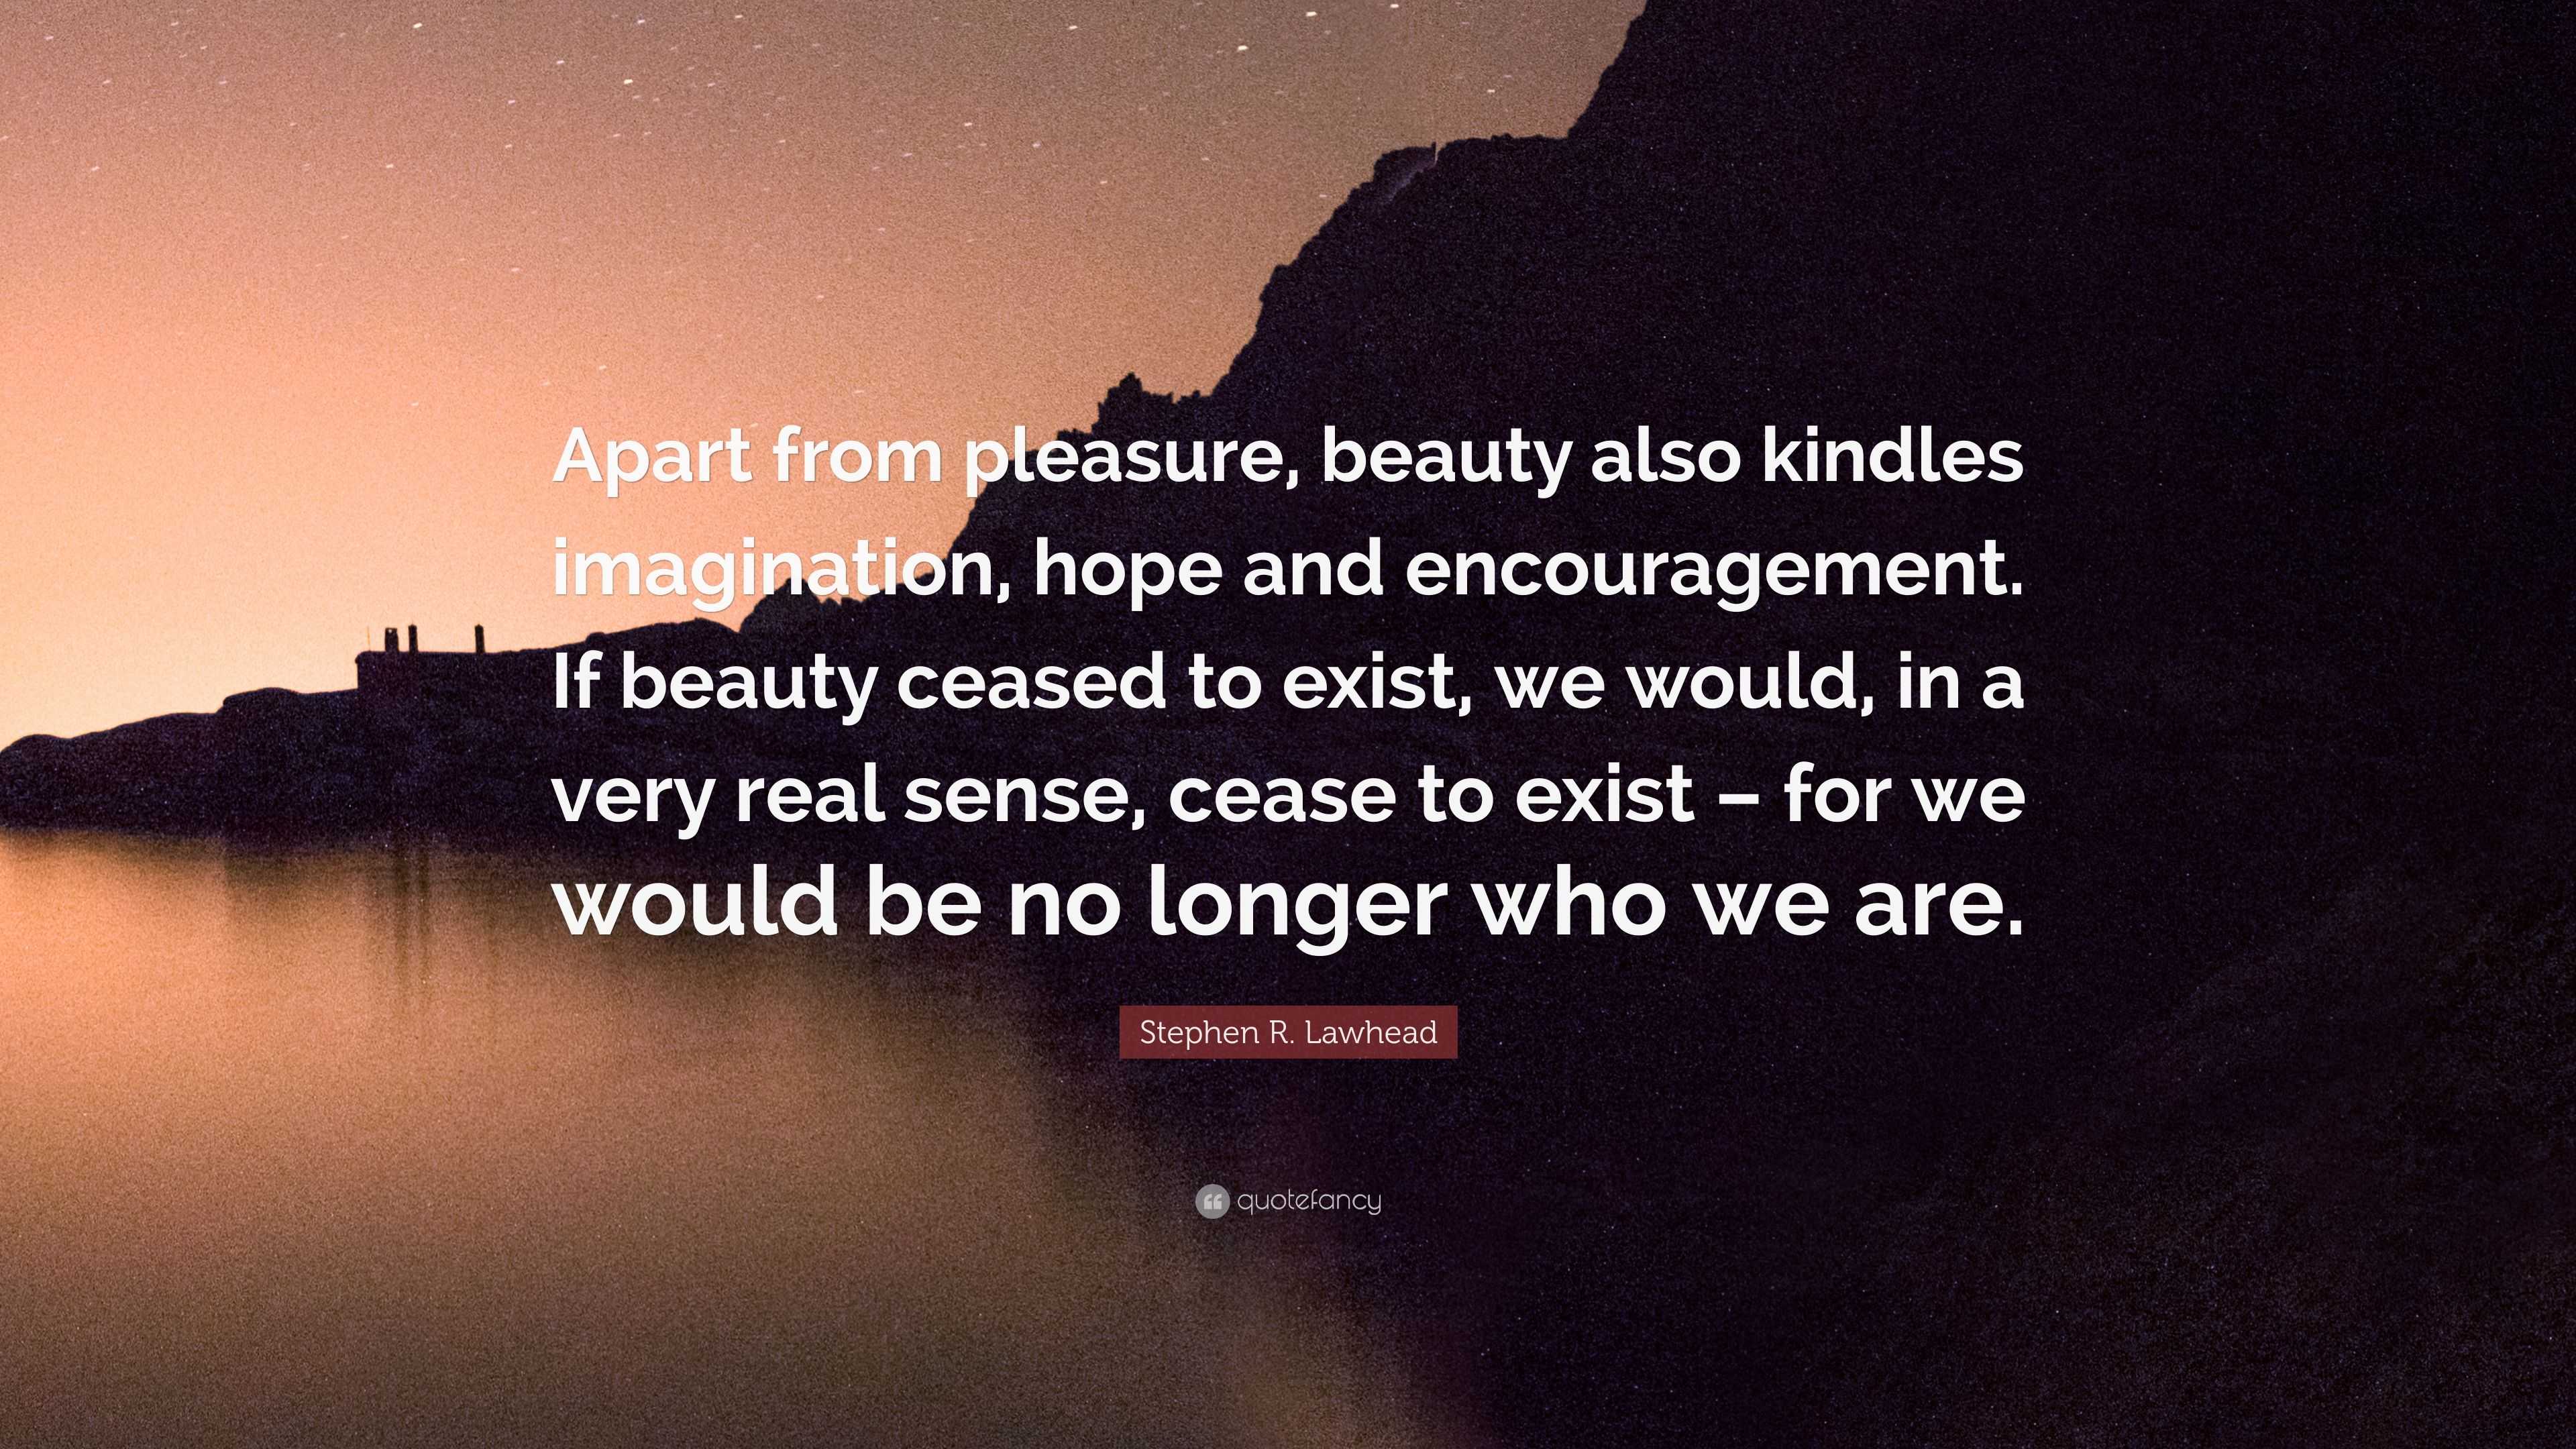 Stephen R. Lawhead Quote: “Apart from pleasure, beauty also